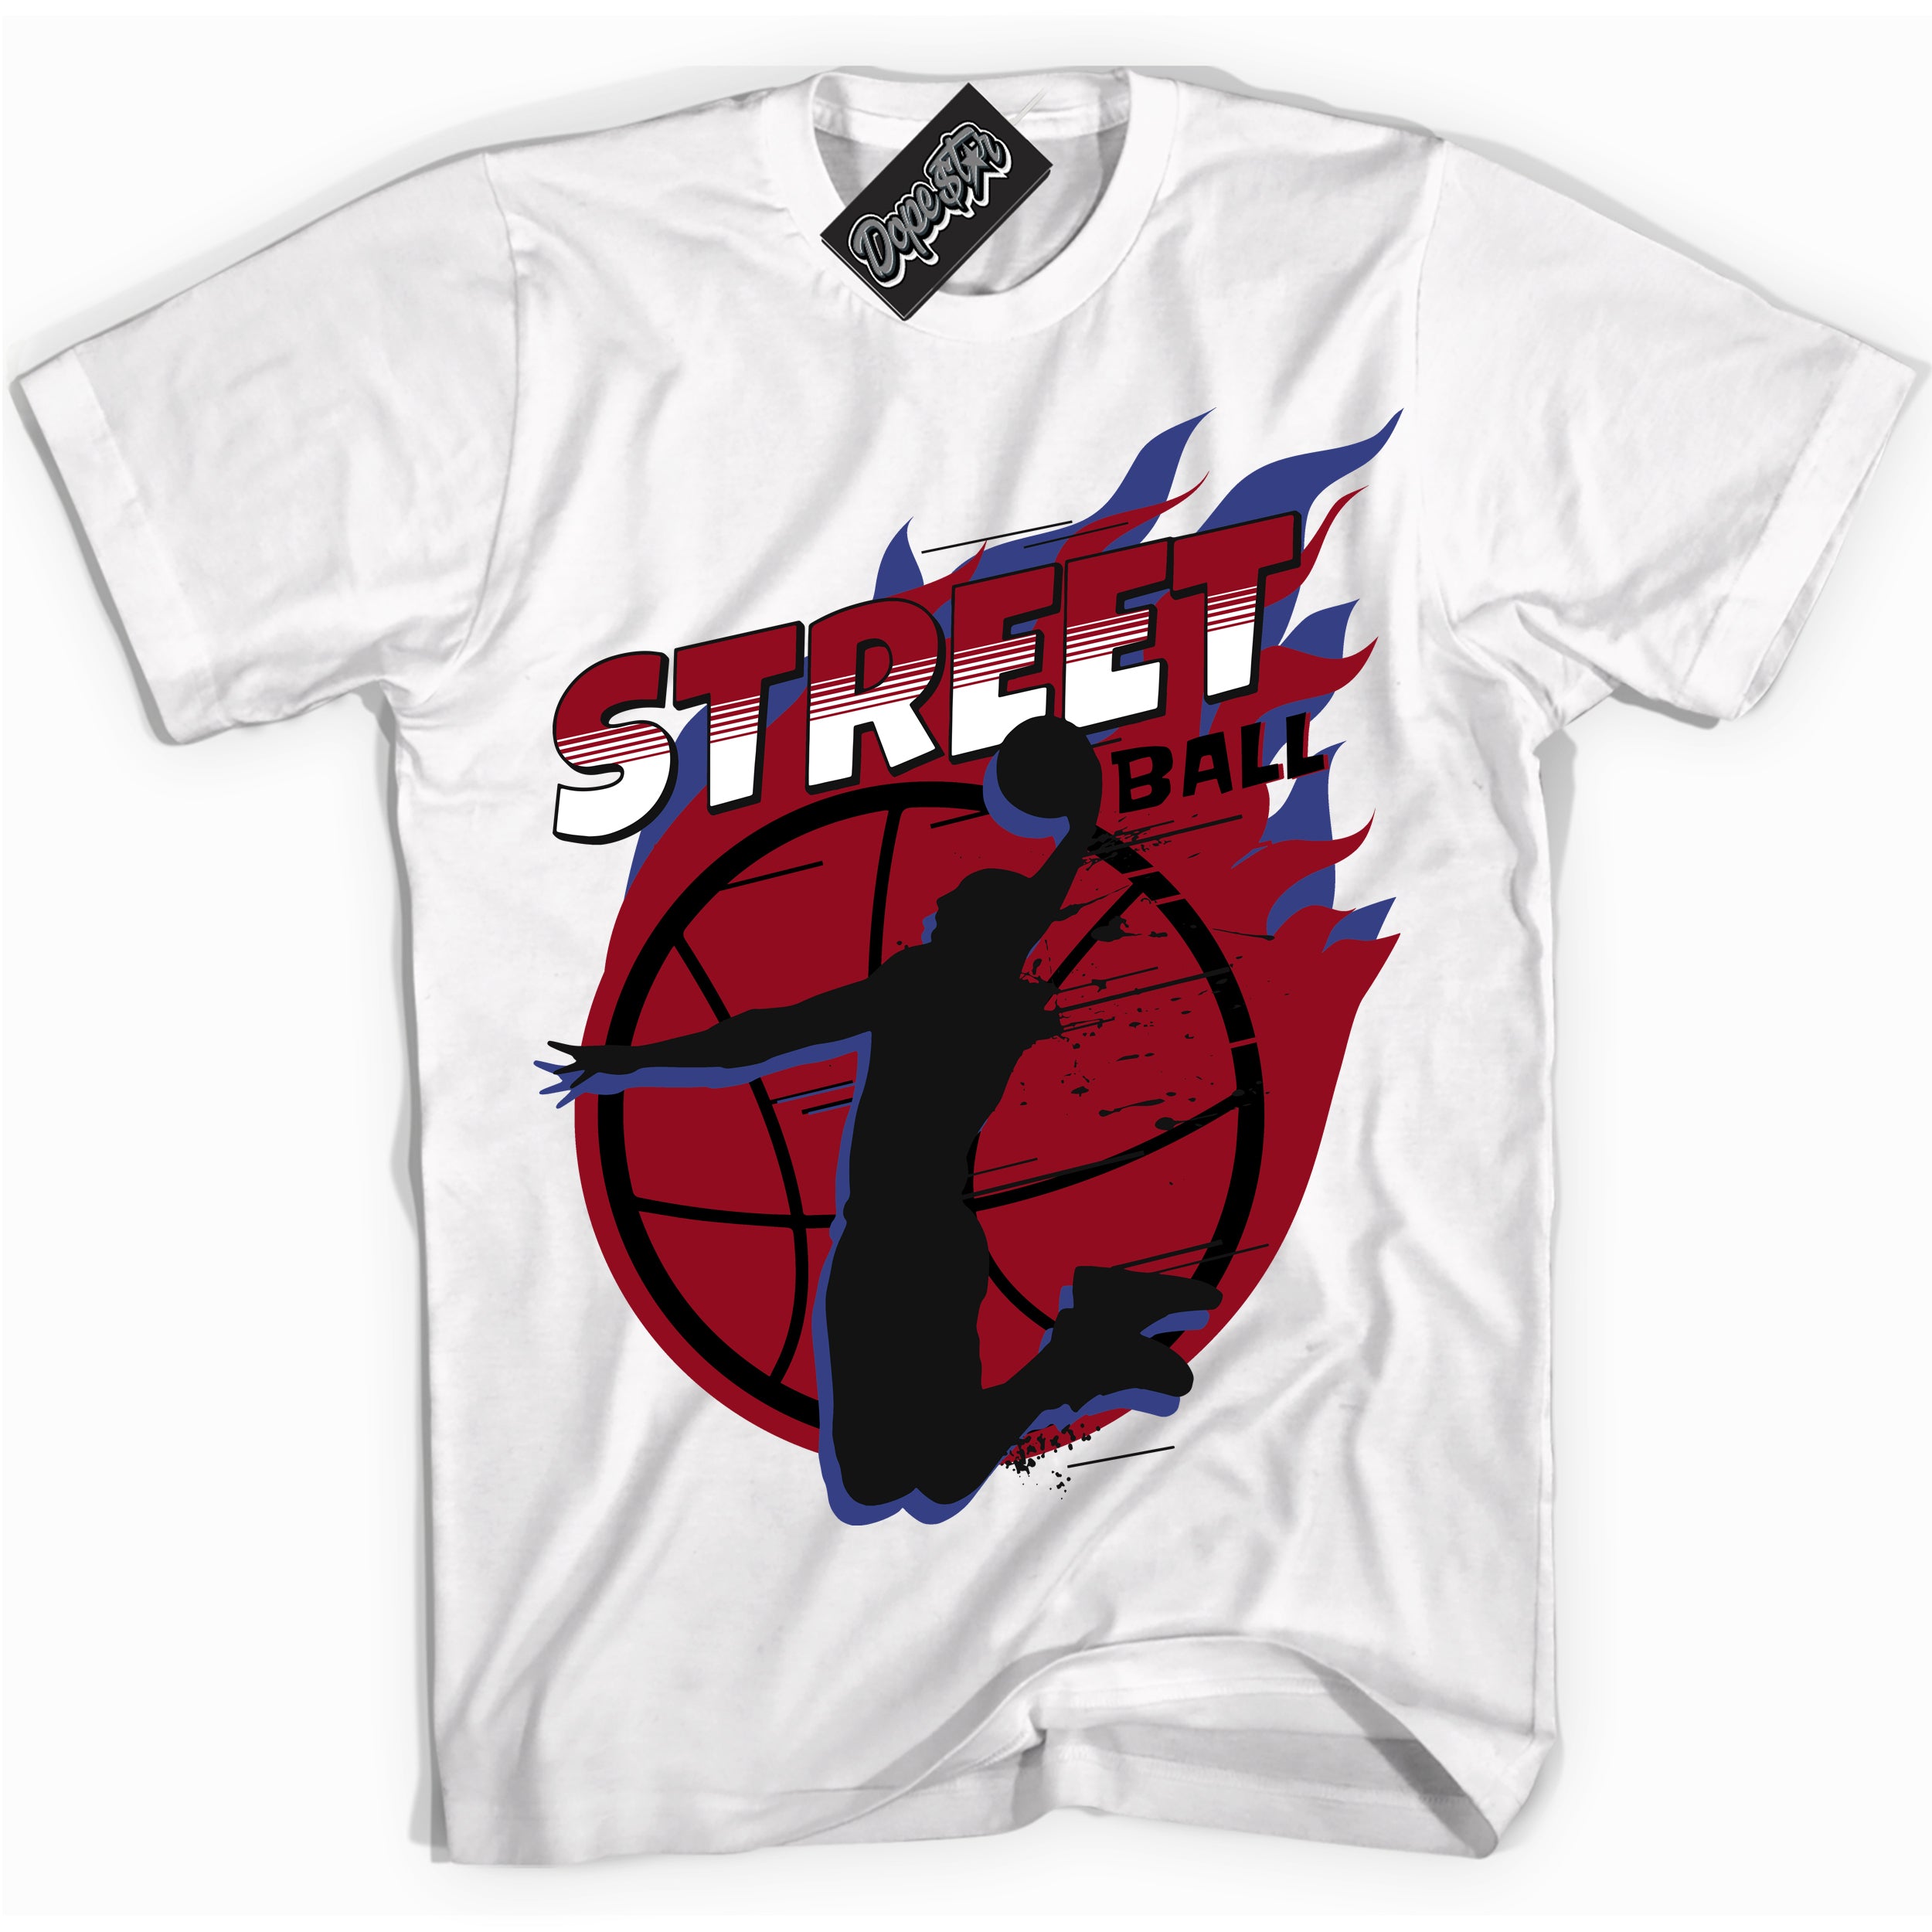 Cool White Shirt with “ Street Ball ” design that perfectly matches Playoffs 8s Sneakers.